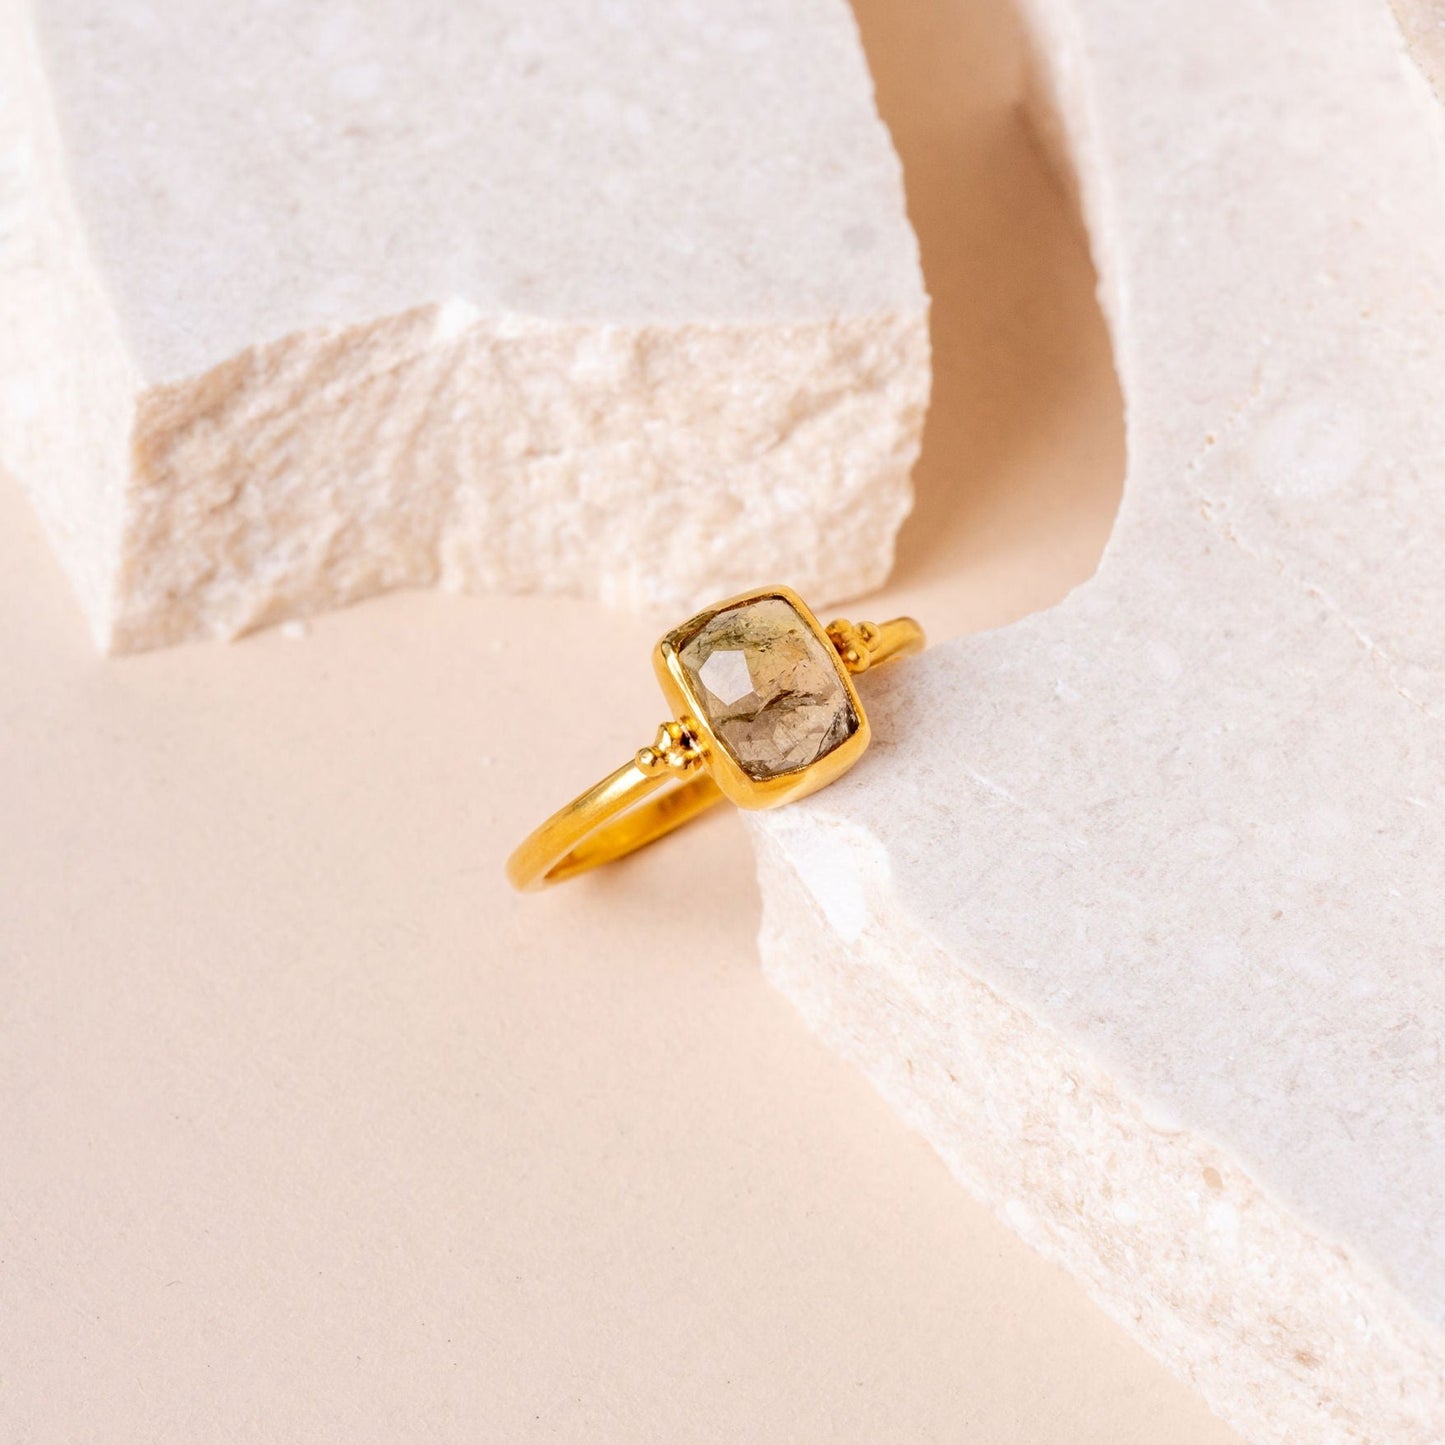 Close-up view of a handcrafted gold ring, showcasing fine granulation details and a beautiful, organic olive-colored gemstone.